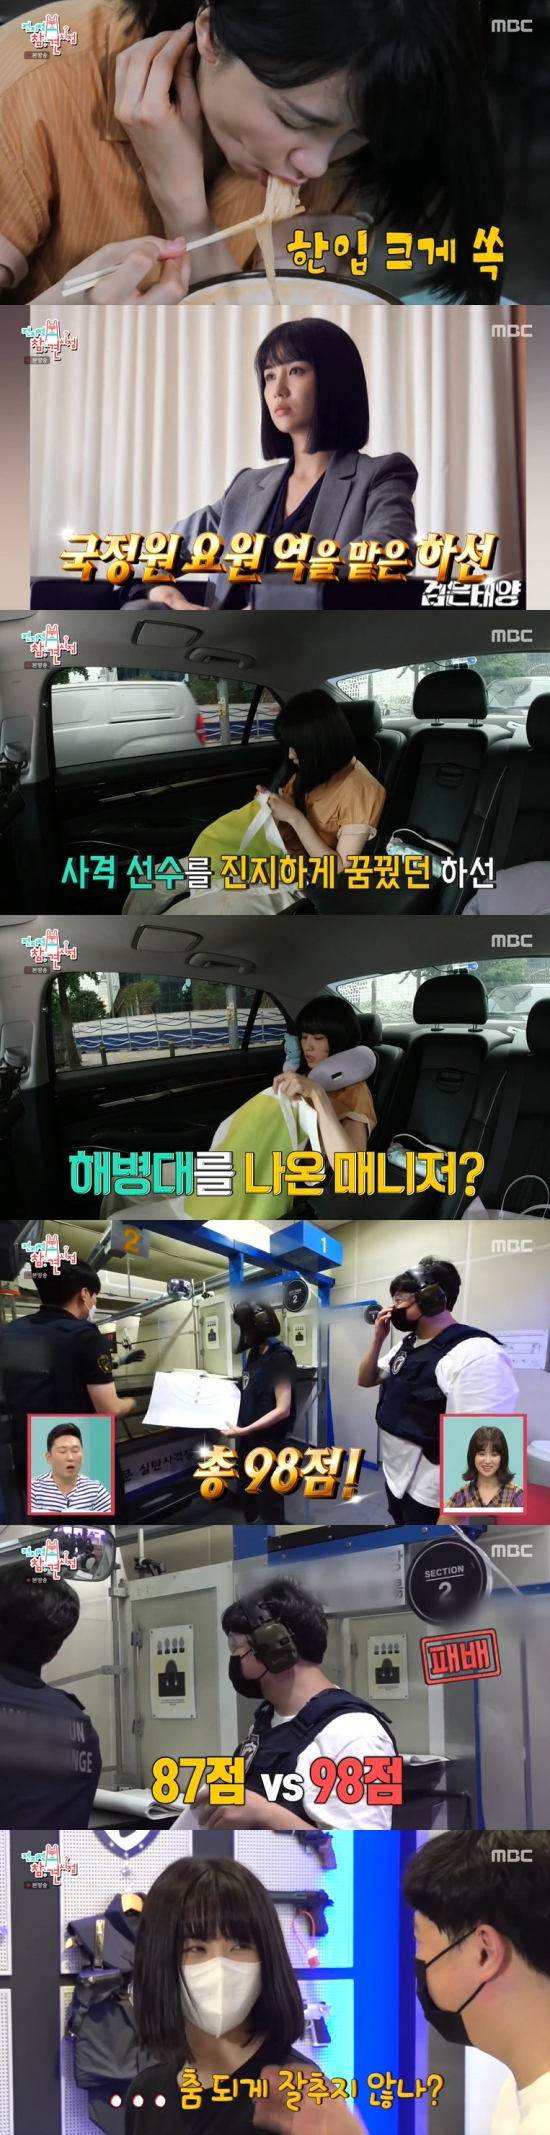 In MBC Point of Omniscient Interfere broadcast on the 21st, Park Ha-sun missed his brother who left the world.On this day, Park Ha-sun found a study cafe and used the facility familiarly.Park Ha-sun Manager said,  (Park Ha-sun) is going to be a child and then I split the time until the House of Representatives and do it at a study cafe.My sister spends a day, and I wanted to show her that she is spending time as a mother, as an actor, and as a good time. Park Ha-sun has worked on a variety of tasks at a study cafe, including script viewing, interview preparation, radio program preparation, and shopping.In the process, Park Ha-sun showed a special affection for BTS, such as using Goods and watching videos.Park Ha-sun then moved to the exhibition hall by bus, and while waiting for the bus, he made a video conversation with Ryu Soo-young and made a sweet atmosphere.Park Ha-sun wrote a guest book after watching the exhibition, and at this time found the name left on his last visit.Park Ha-sun wrote down his brothers name at the time, and confessed, My brother went to Sky last year. I came to this place with my brother often.Park Ha-sun said, I think Im still alive when I write my name when I write my brothers name.There are people who seem to be alive and embarrassed to write their brothers name when they make a restaurant reservation or something.People are slowing down, talking about something else, pretending that we didnt have a brother. Its not like people die.Park Ha-sun also met with Manager after eating heat noodles.Park Ha-sun decided to practice in advance at the shooting range ahead of a drama shoot with a shooting scene, and said, I thought seriously about shooting, so I thought about it.I will do better than a good man. Furthermore, Park Ha-sun Manager was from the Marine Corps, and Park Ha-sun suggested that we make a bet.Park Ha-sun Manager expressed confidence, saying, I think Ill do better, you have experience shooting, but I shot more.But Park Ha-sun had 10 points from the first, and had a total of 98 points, with two of his ten shots off and 10 right.Park Ha-sun Manager scored 87 points and said, My sisters grandfather is from a soldier. The blood flows from a soldier.I have been a police officer or a soldier. I think you shoot well. Park Ha-sun said, I won. What do I want? Dont you dance well? Dont you sing well?I will go to the filming site and sing a song when there are staff. Photo = MBC Broadcasting Screen